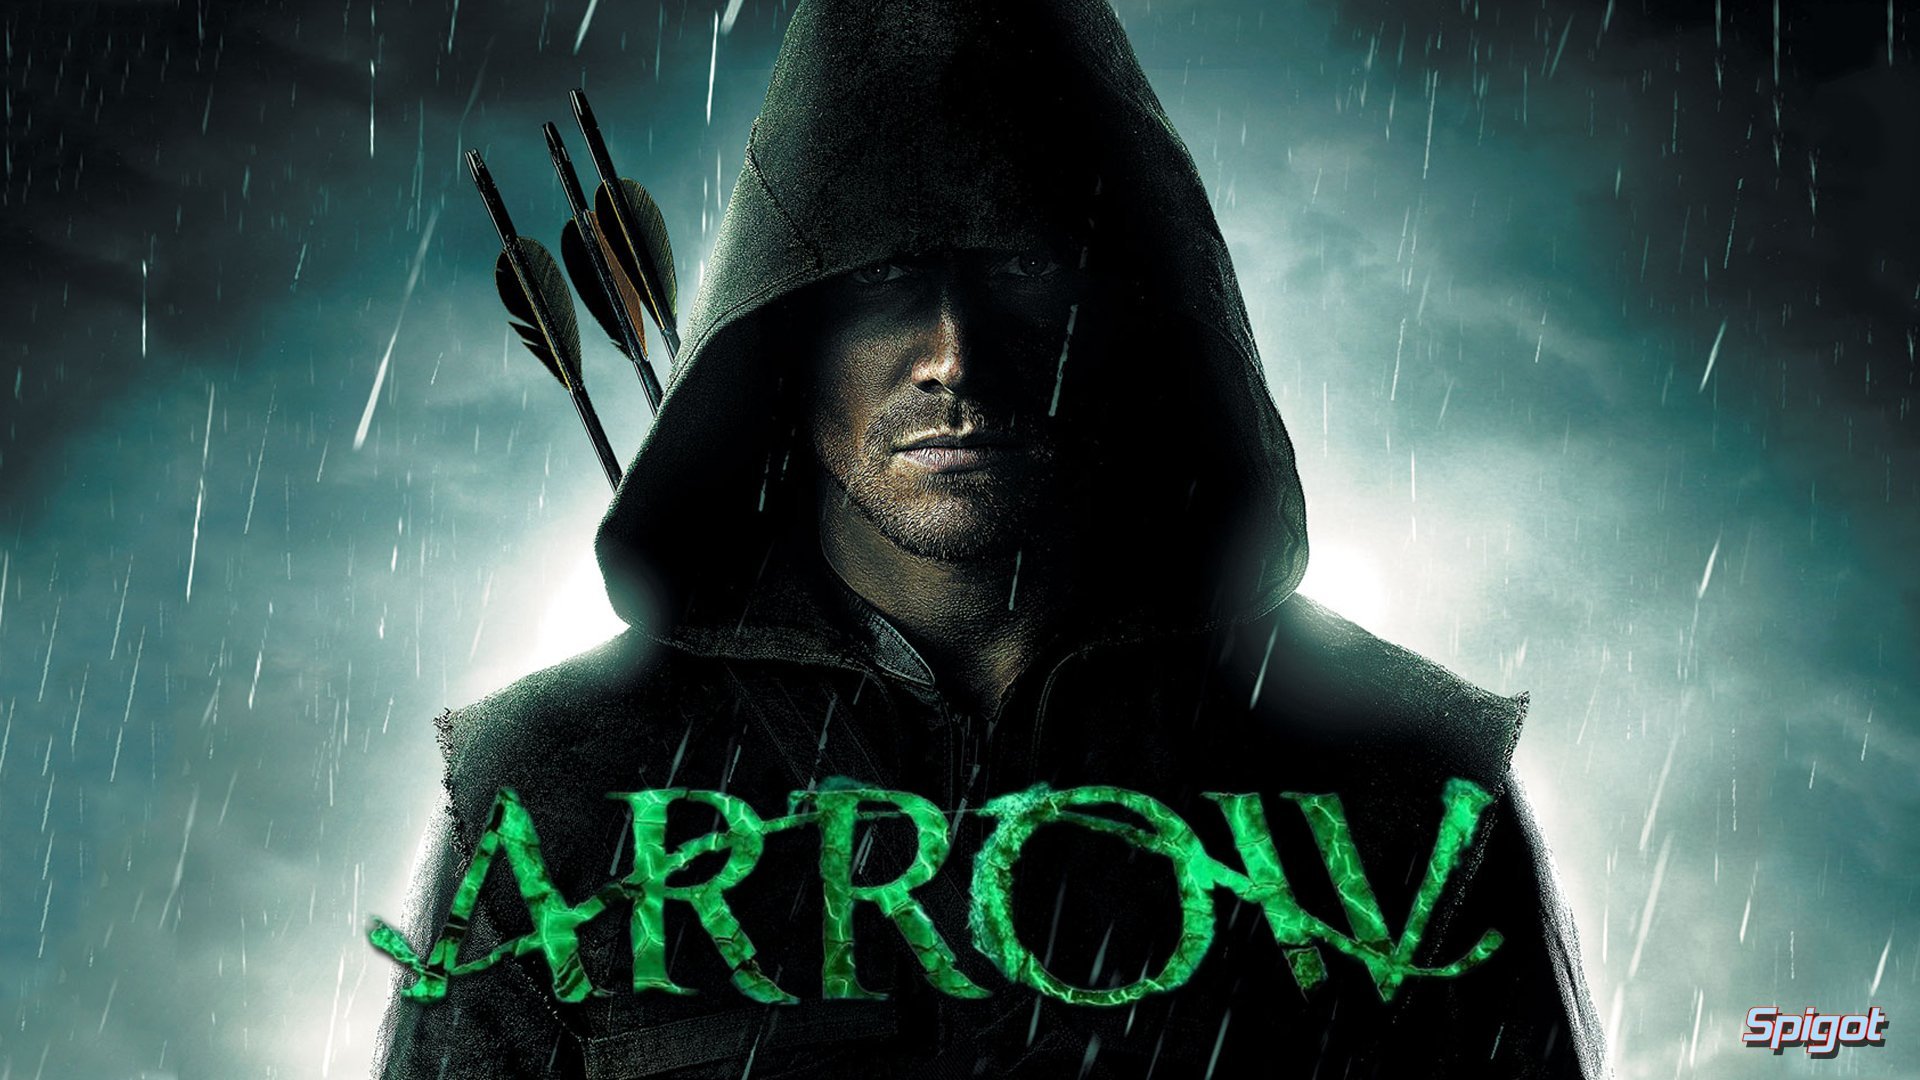 ARROW green action adventure crime television series poster warrior 1920x1080